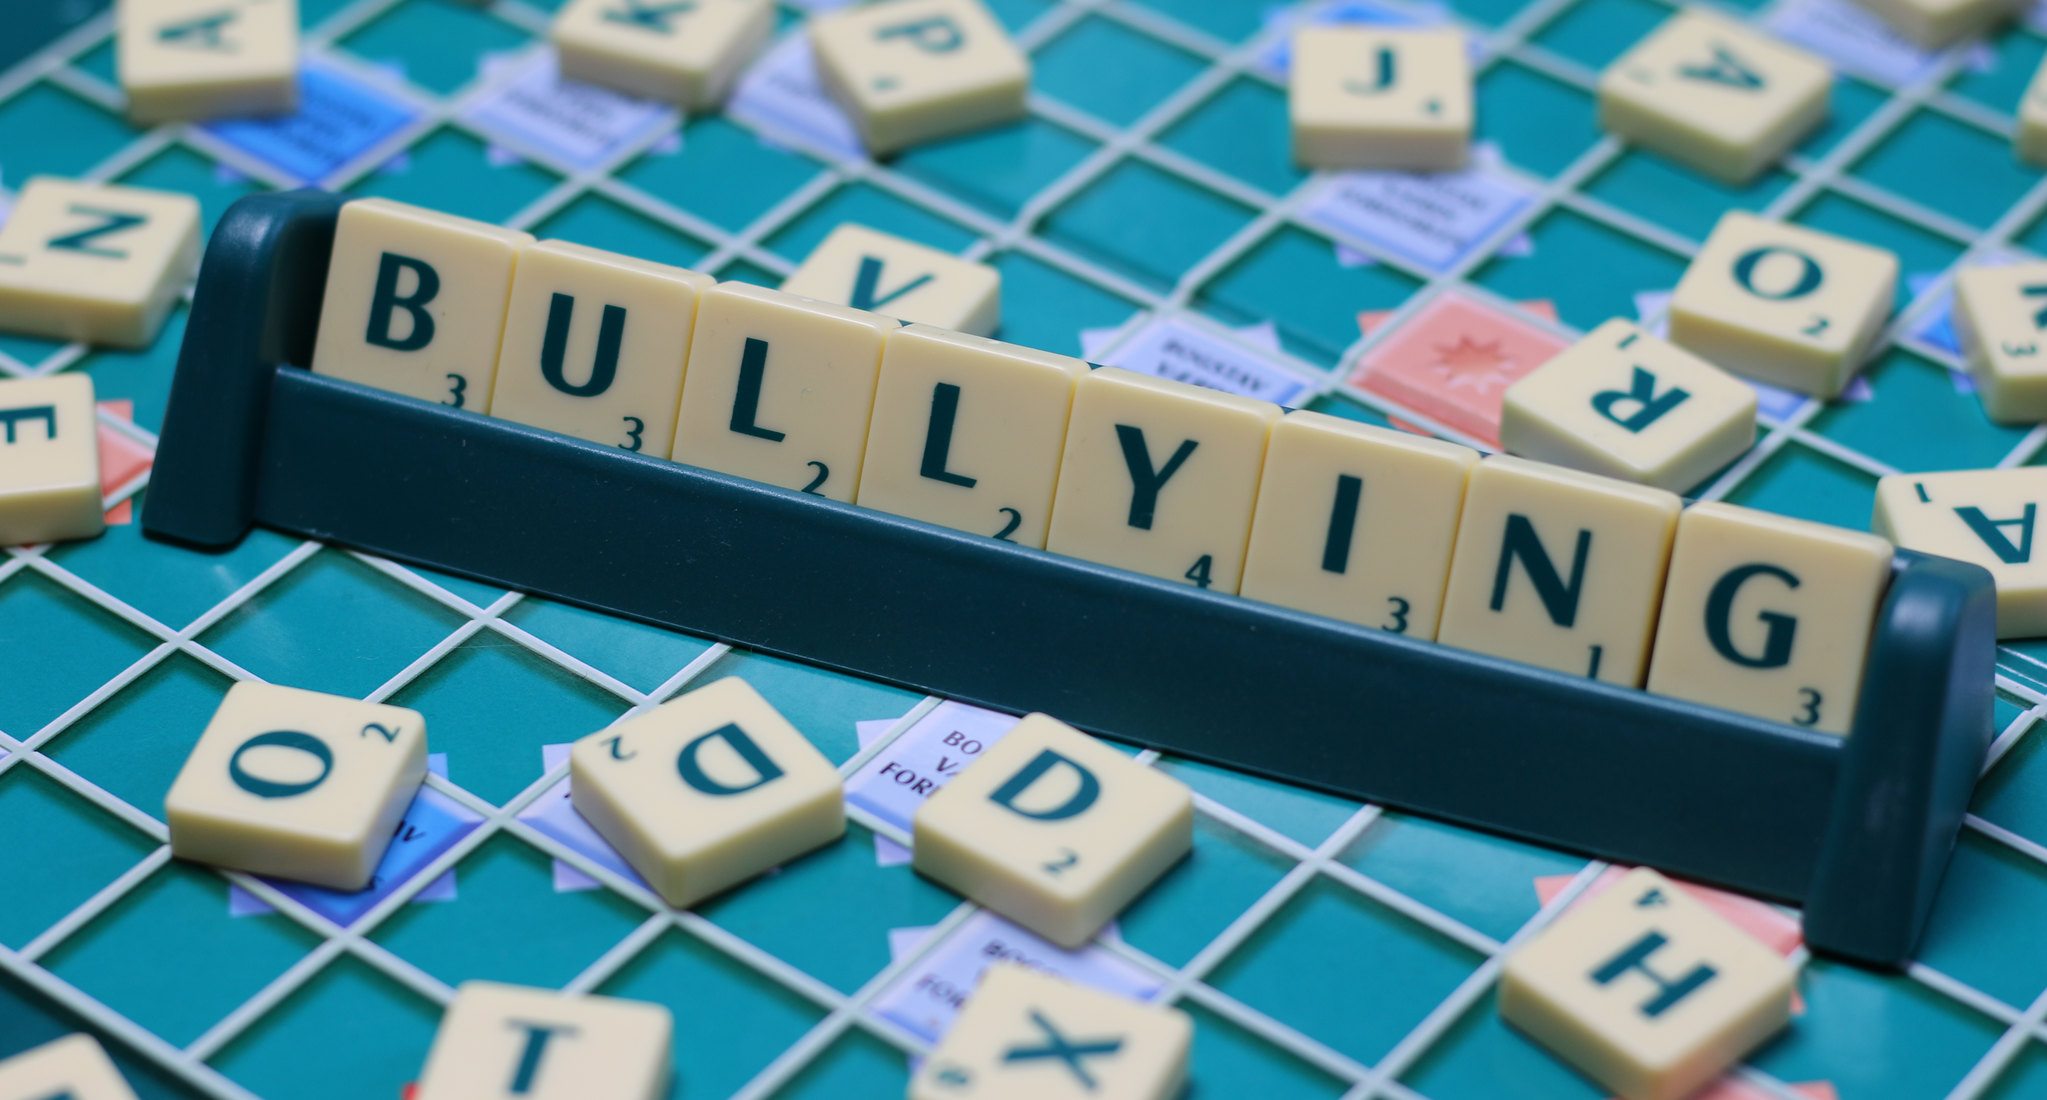 How to tackle bullying